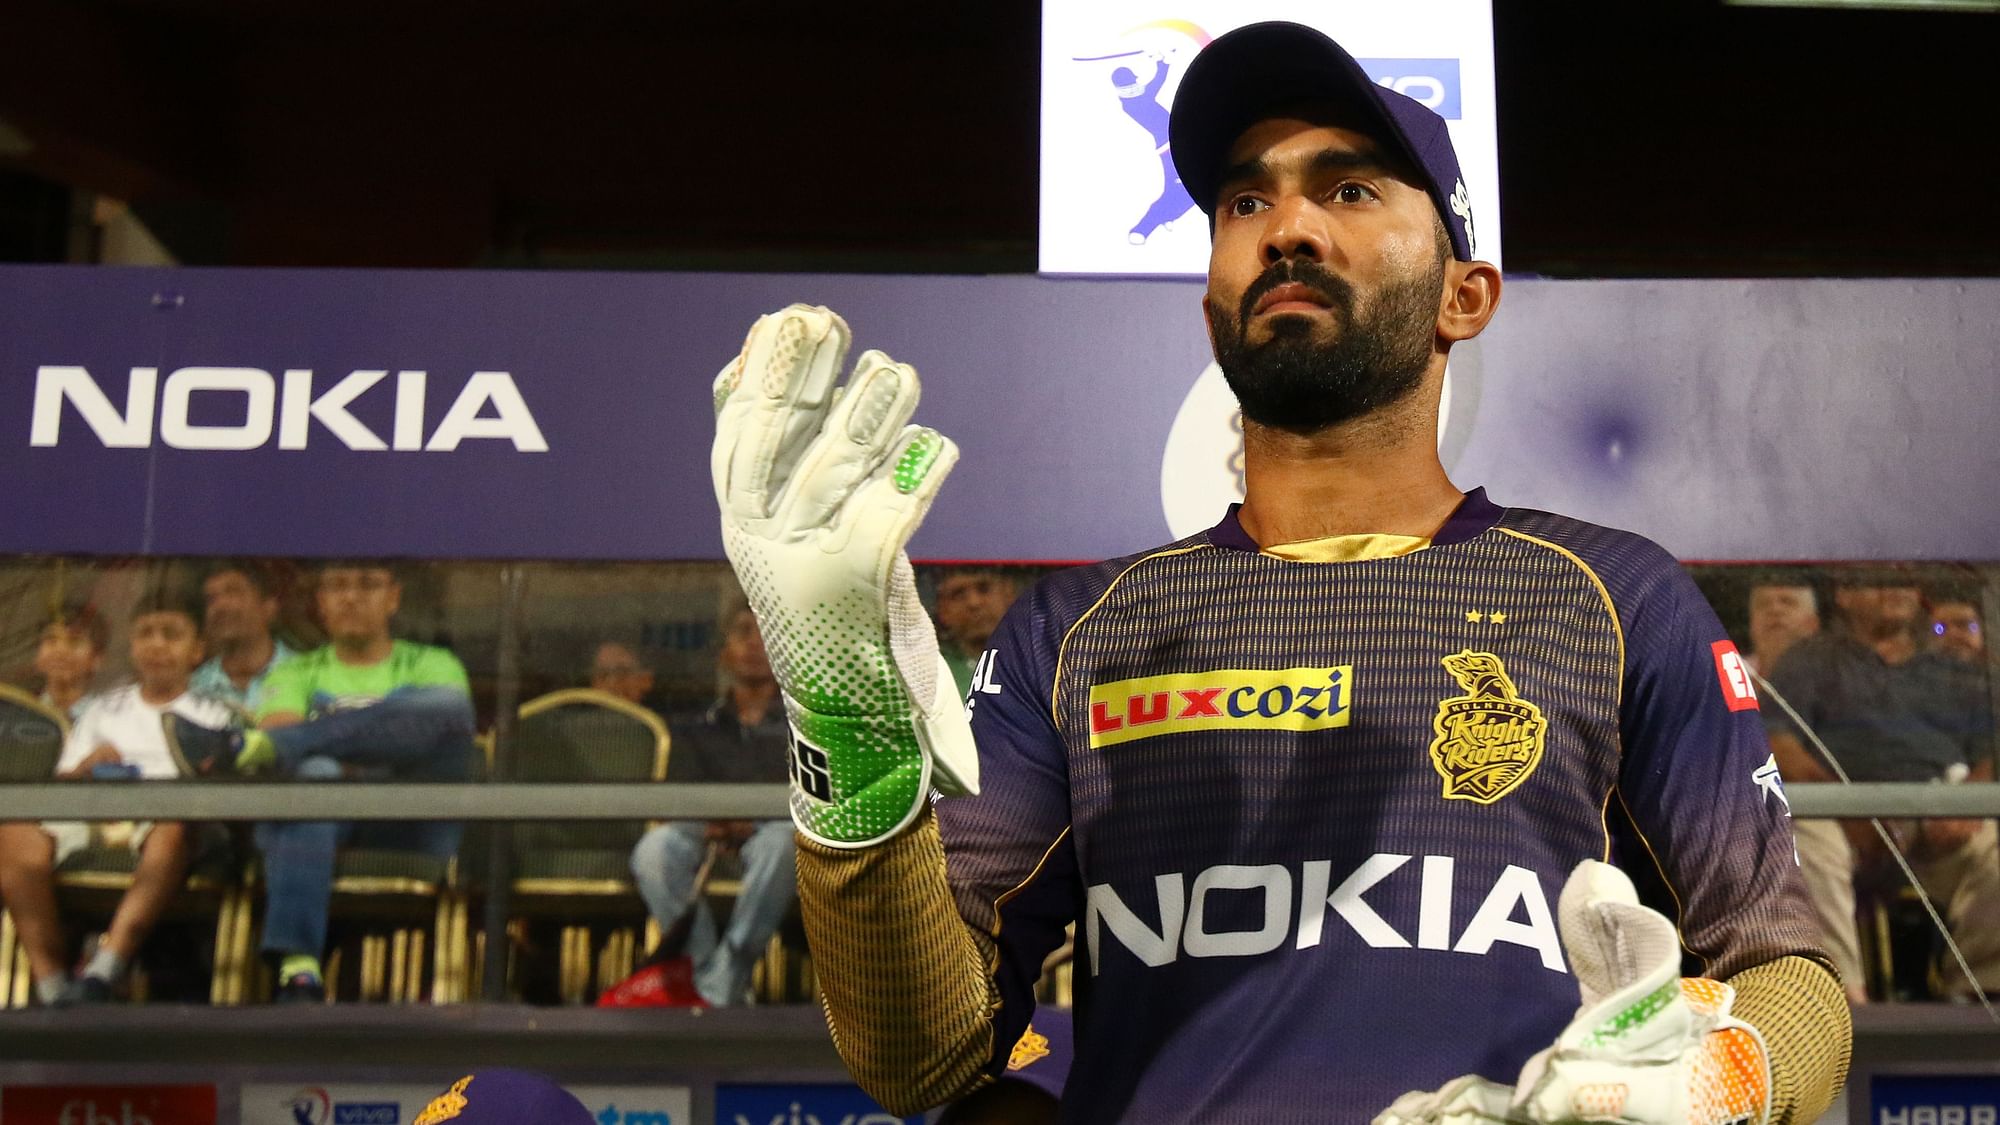 Wicketkeeper-batsman Dinesh Karthik was named in India’s 15-member squad for the upcoming World Cup.